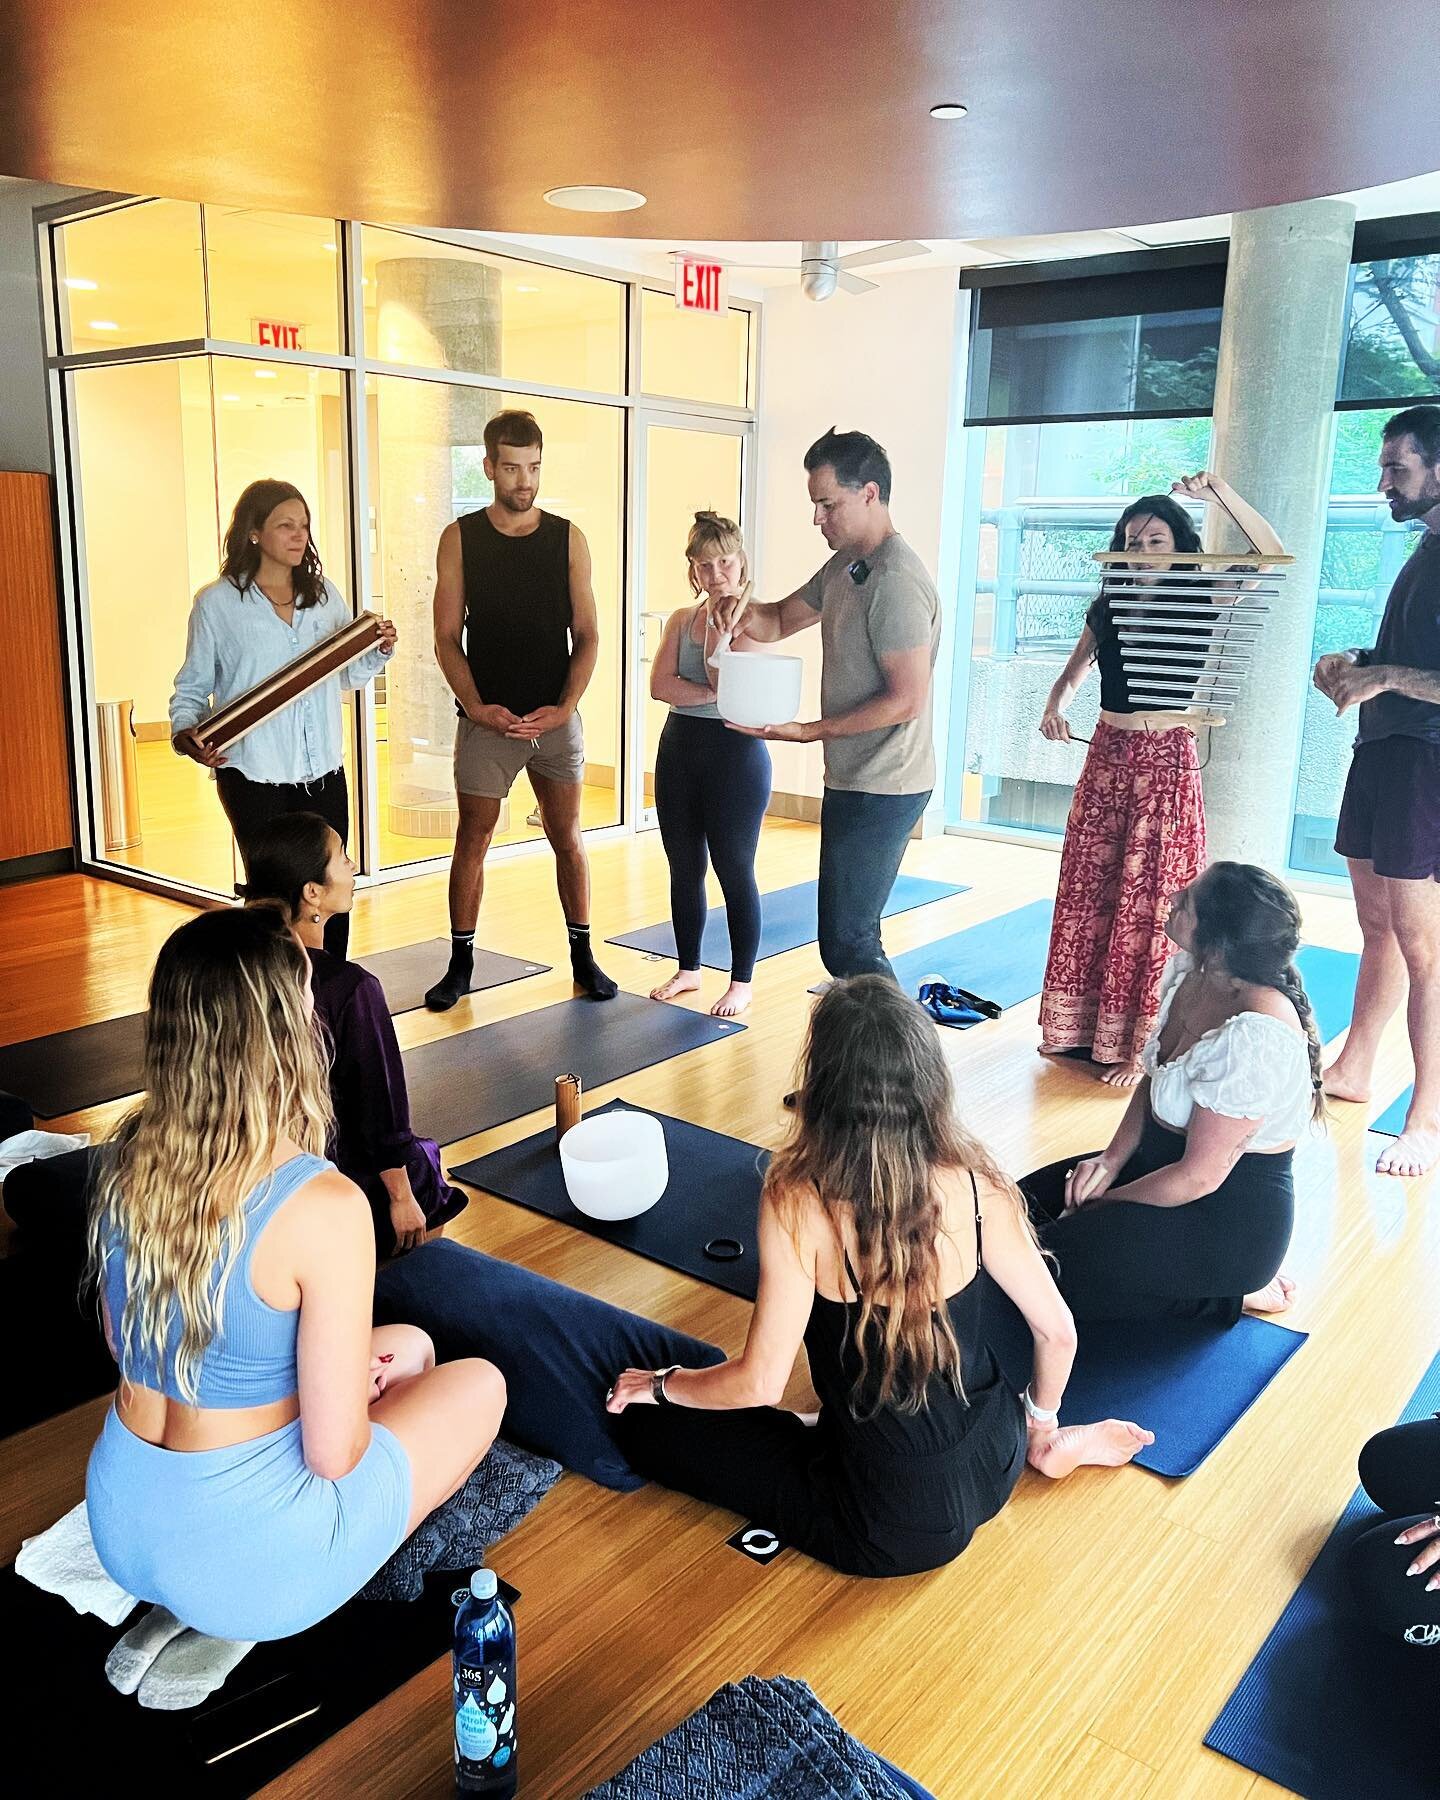 Amazing teacher training day! So many beautiful souls! Excited to bring #sonicmeditation in collaboration with @michael_gervais to @equinox clubs ✨❤️✨